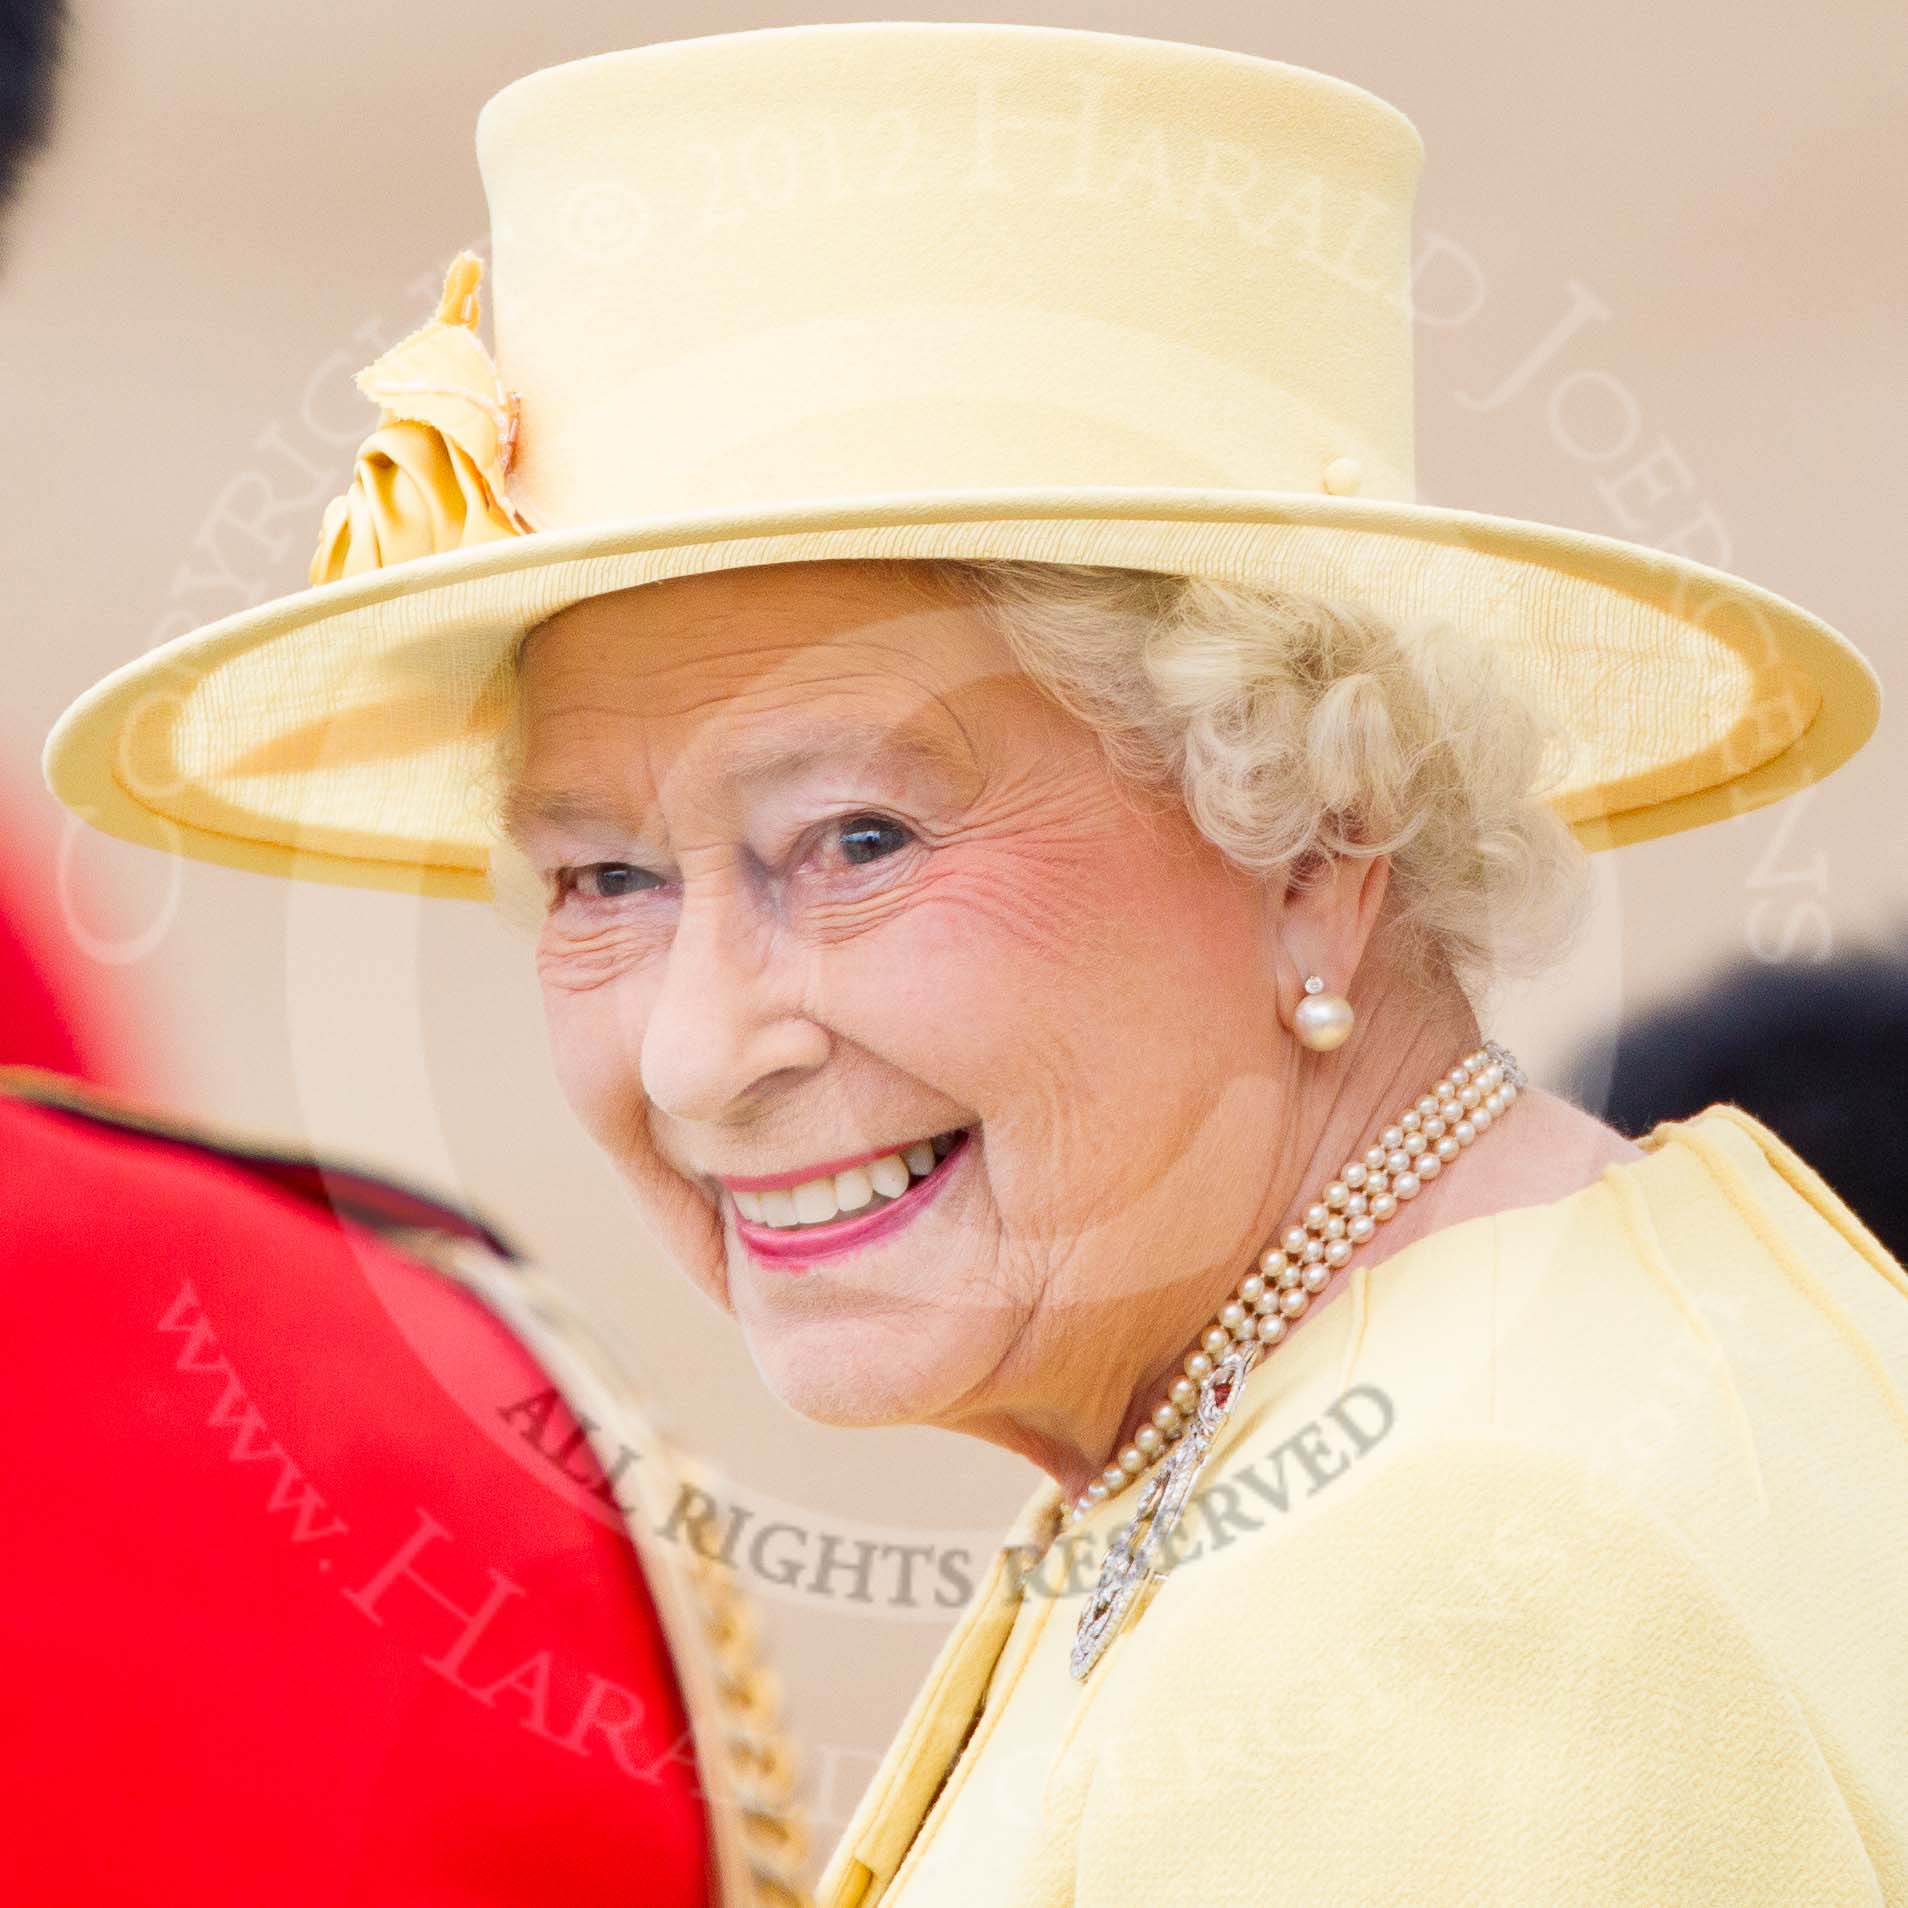 Trooping the Colour 2012: A close-up view of HM The Queen, after the Inspection of the Line back on the saluting basem with HRH The Prince Philip. The photographers favourite shot of the day..
Horse Guards Parade, Westminster,
London SW1,

United Kingdom,
on 16 June 2012 at 11:08, image #254